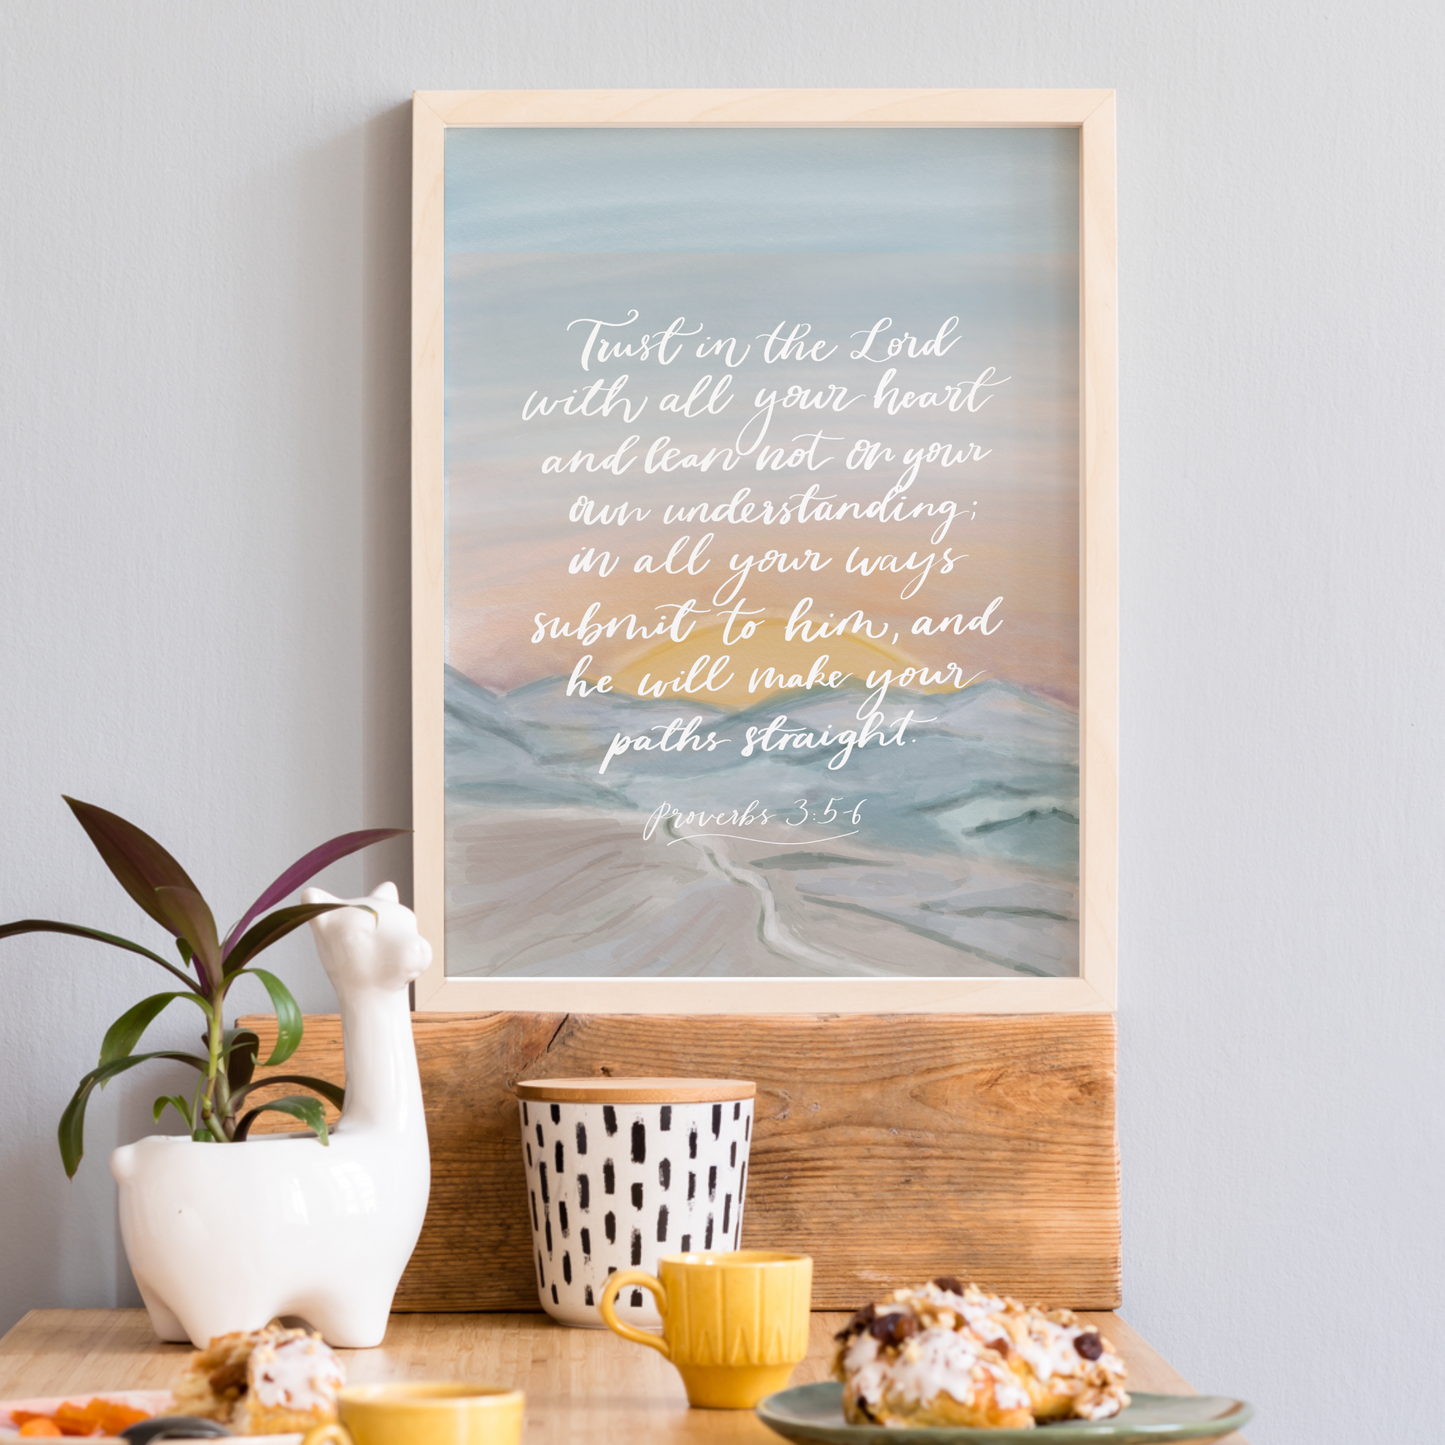 Trust in the Lord Print